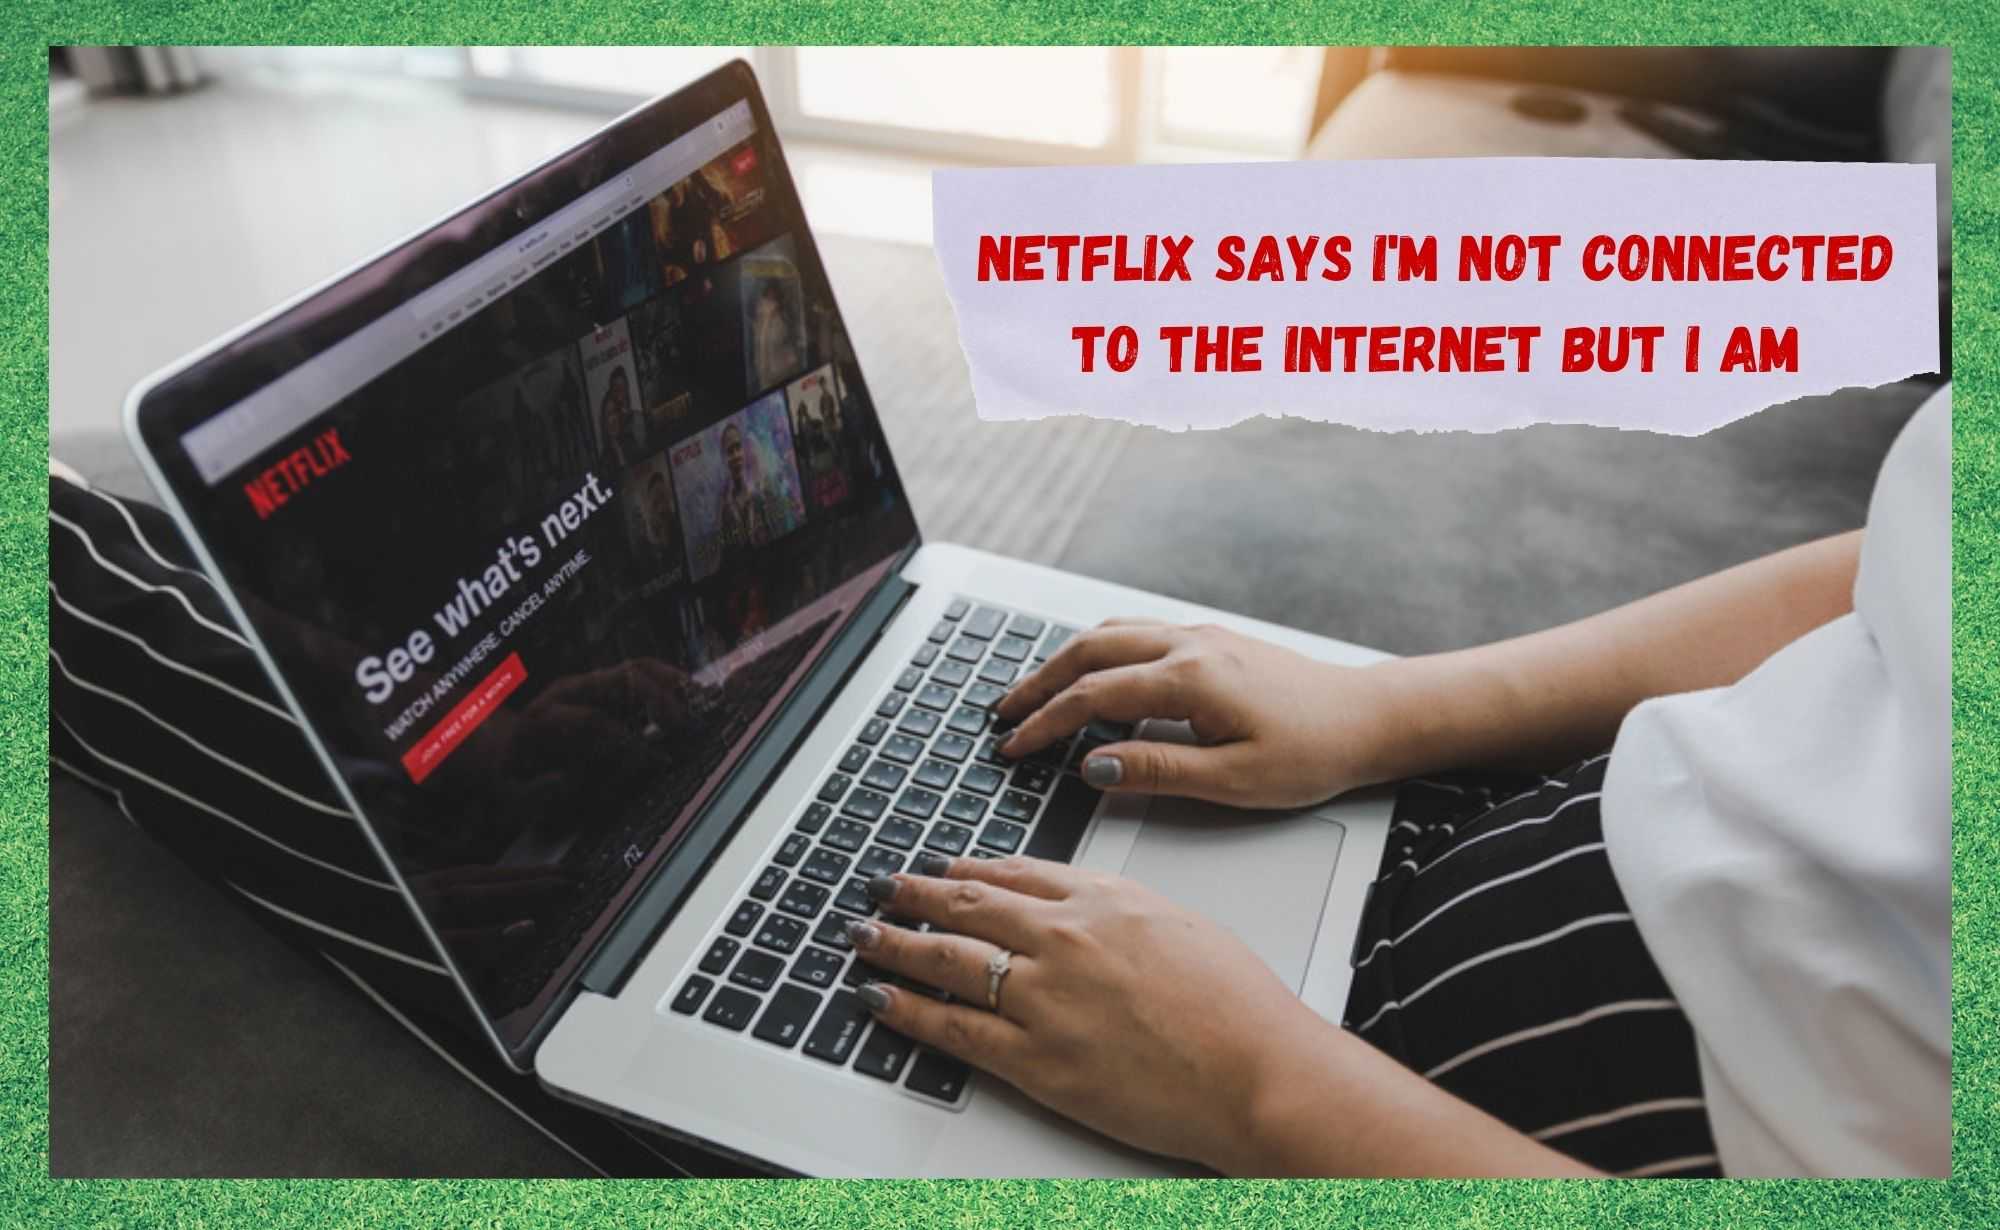 netflix says i'm not connected to the internet but i am